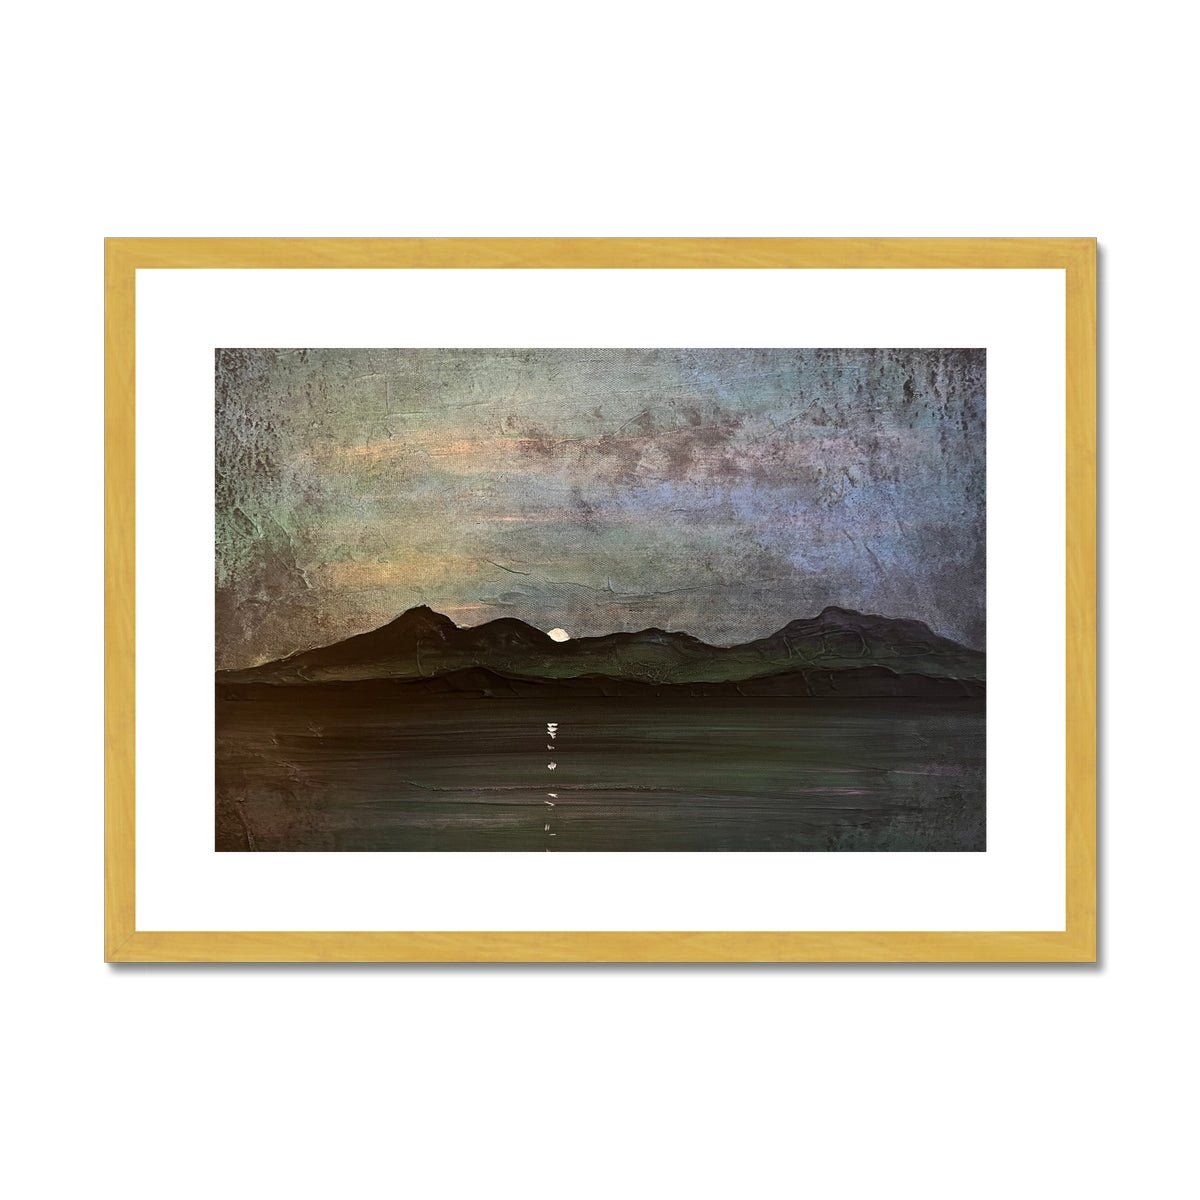 Sleeping Warrior Moonlight Arran Painting | Antique Framed & Mounted Prints From Scotland-Antique Framed & Mounted Prints-Arran Art Gallery-A2 Landscape-Gold Frame-Paintings, Prints, Homeware, Art Gifts From Scotland By Scottish Artist Kevin Hunter